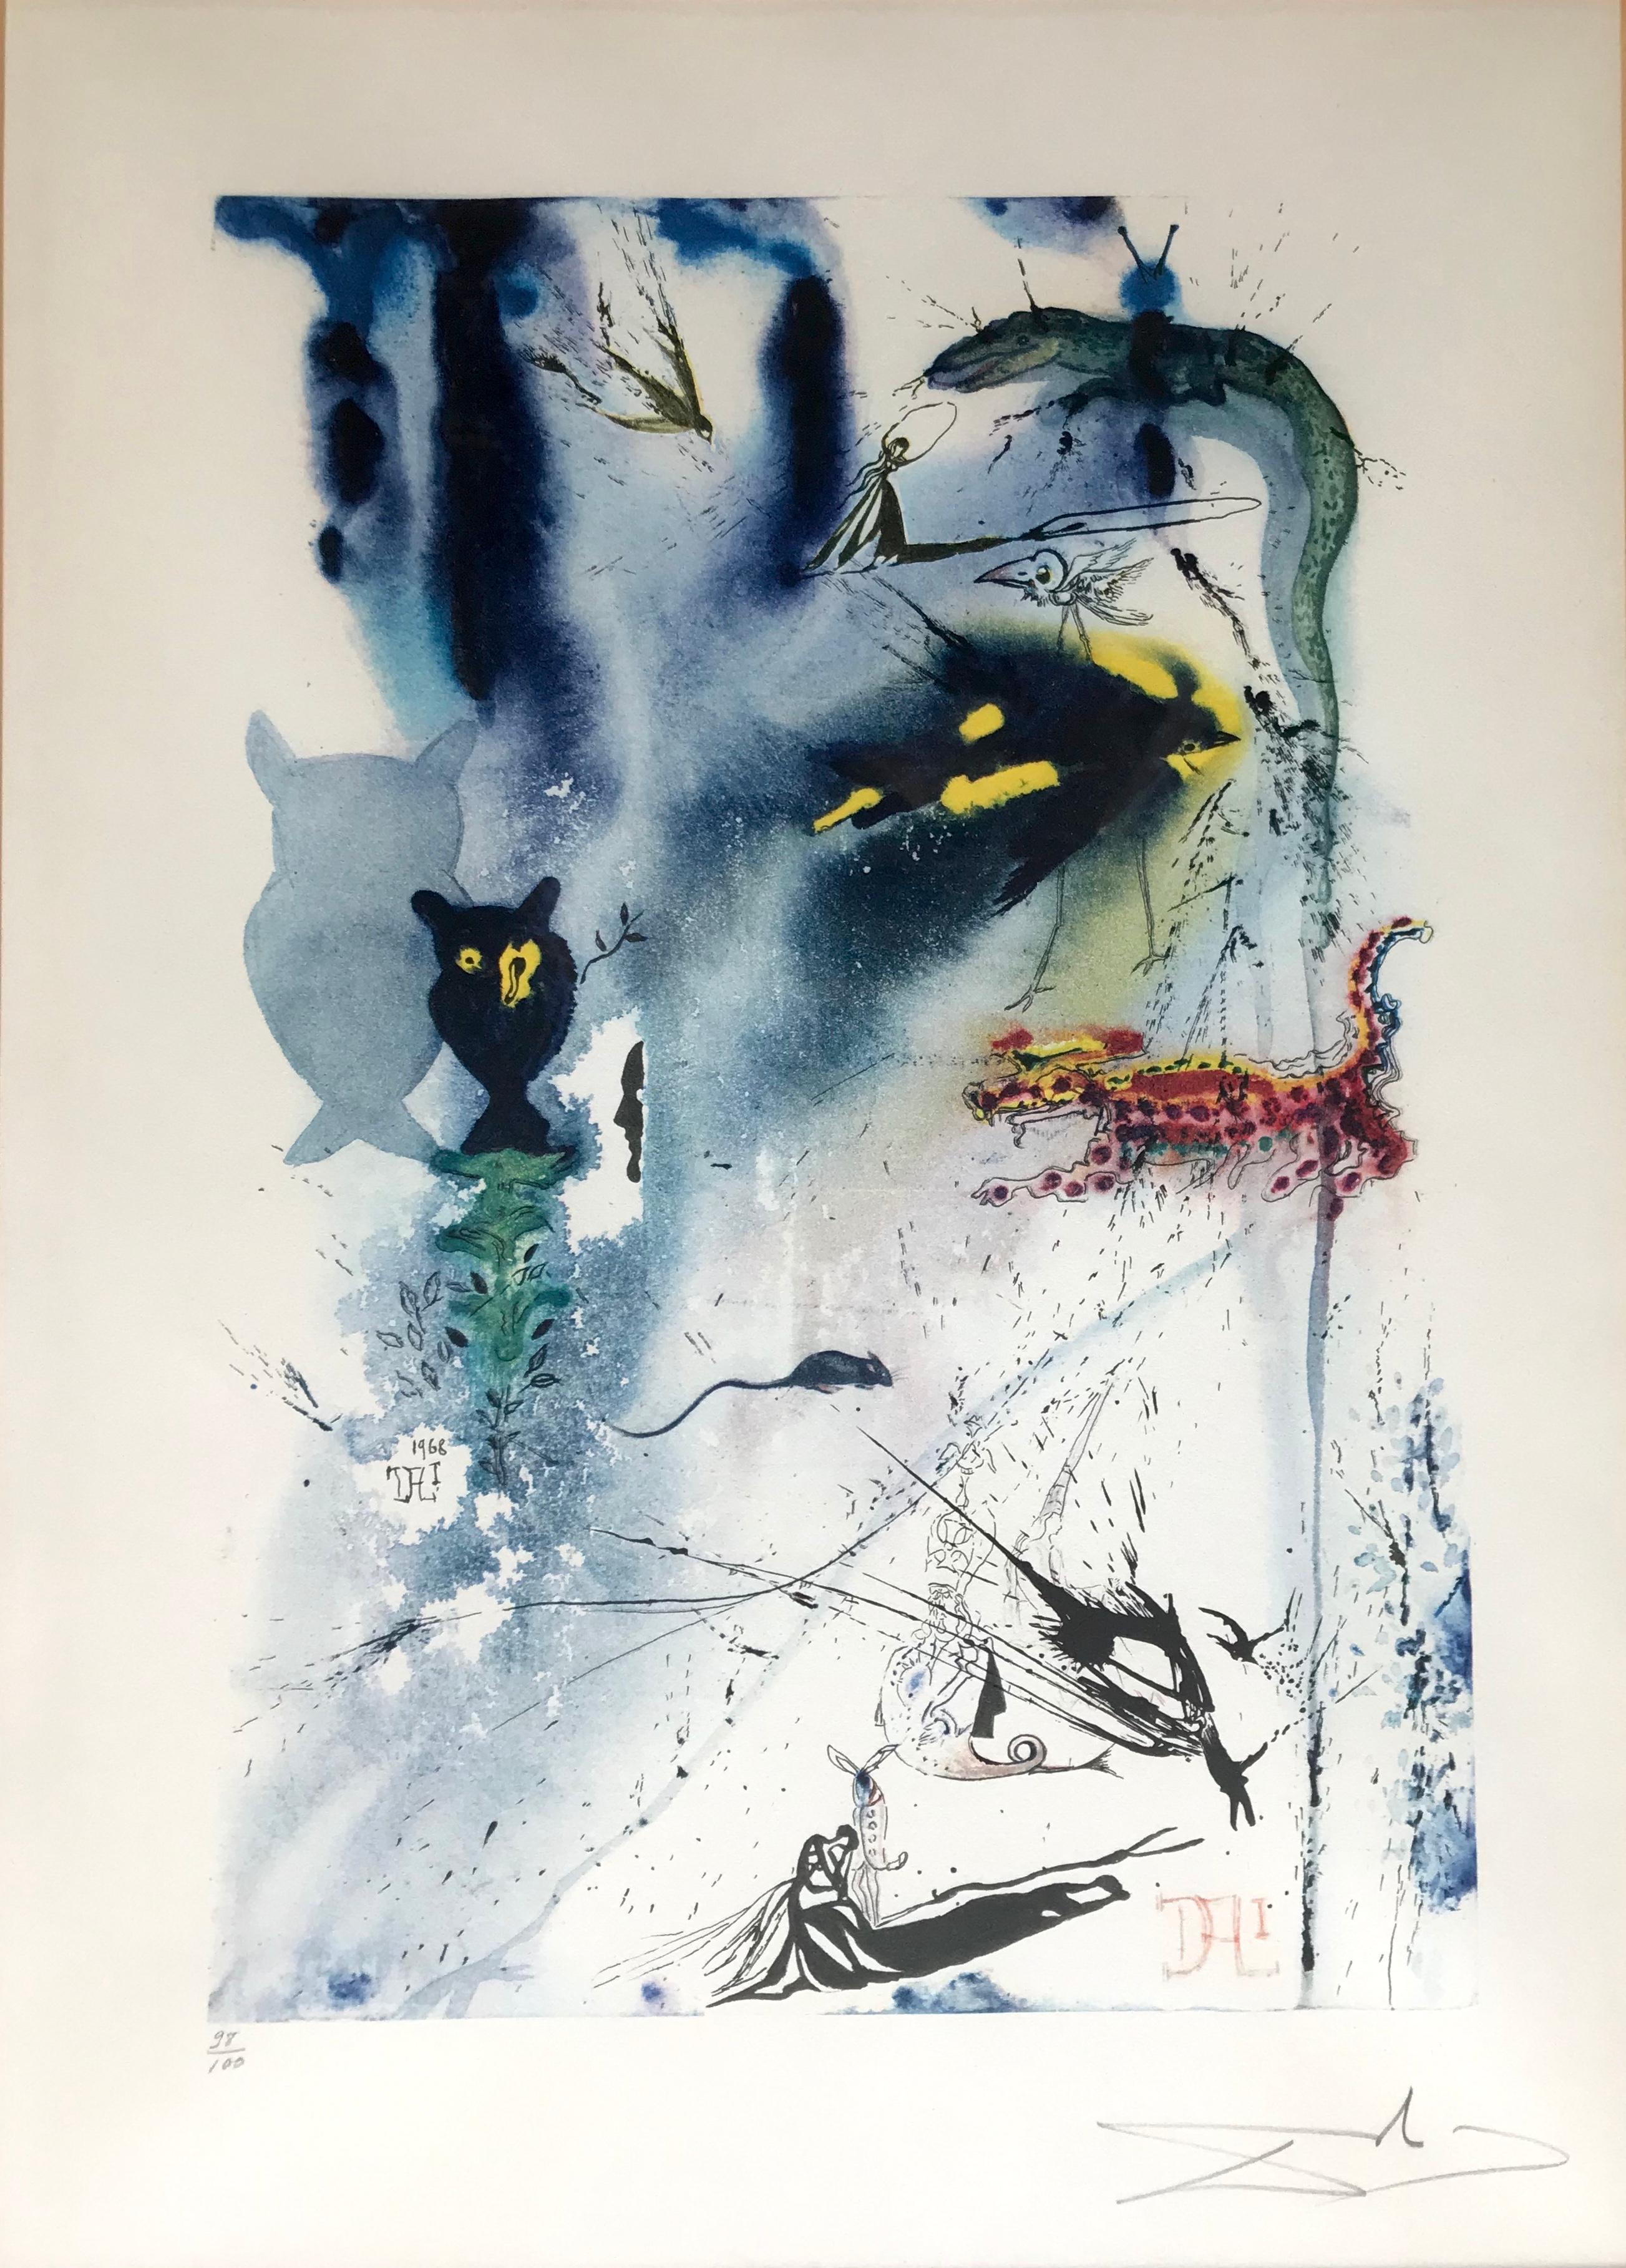 Salvador Dalí Abstract Print - Alice in Wonderland "A Caucus Race and A Long Tale"